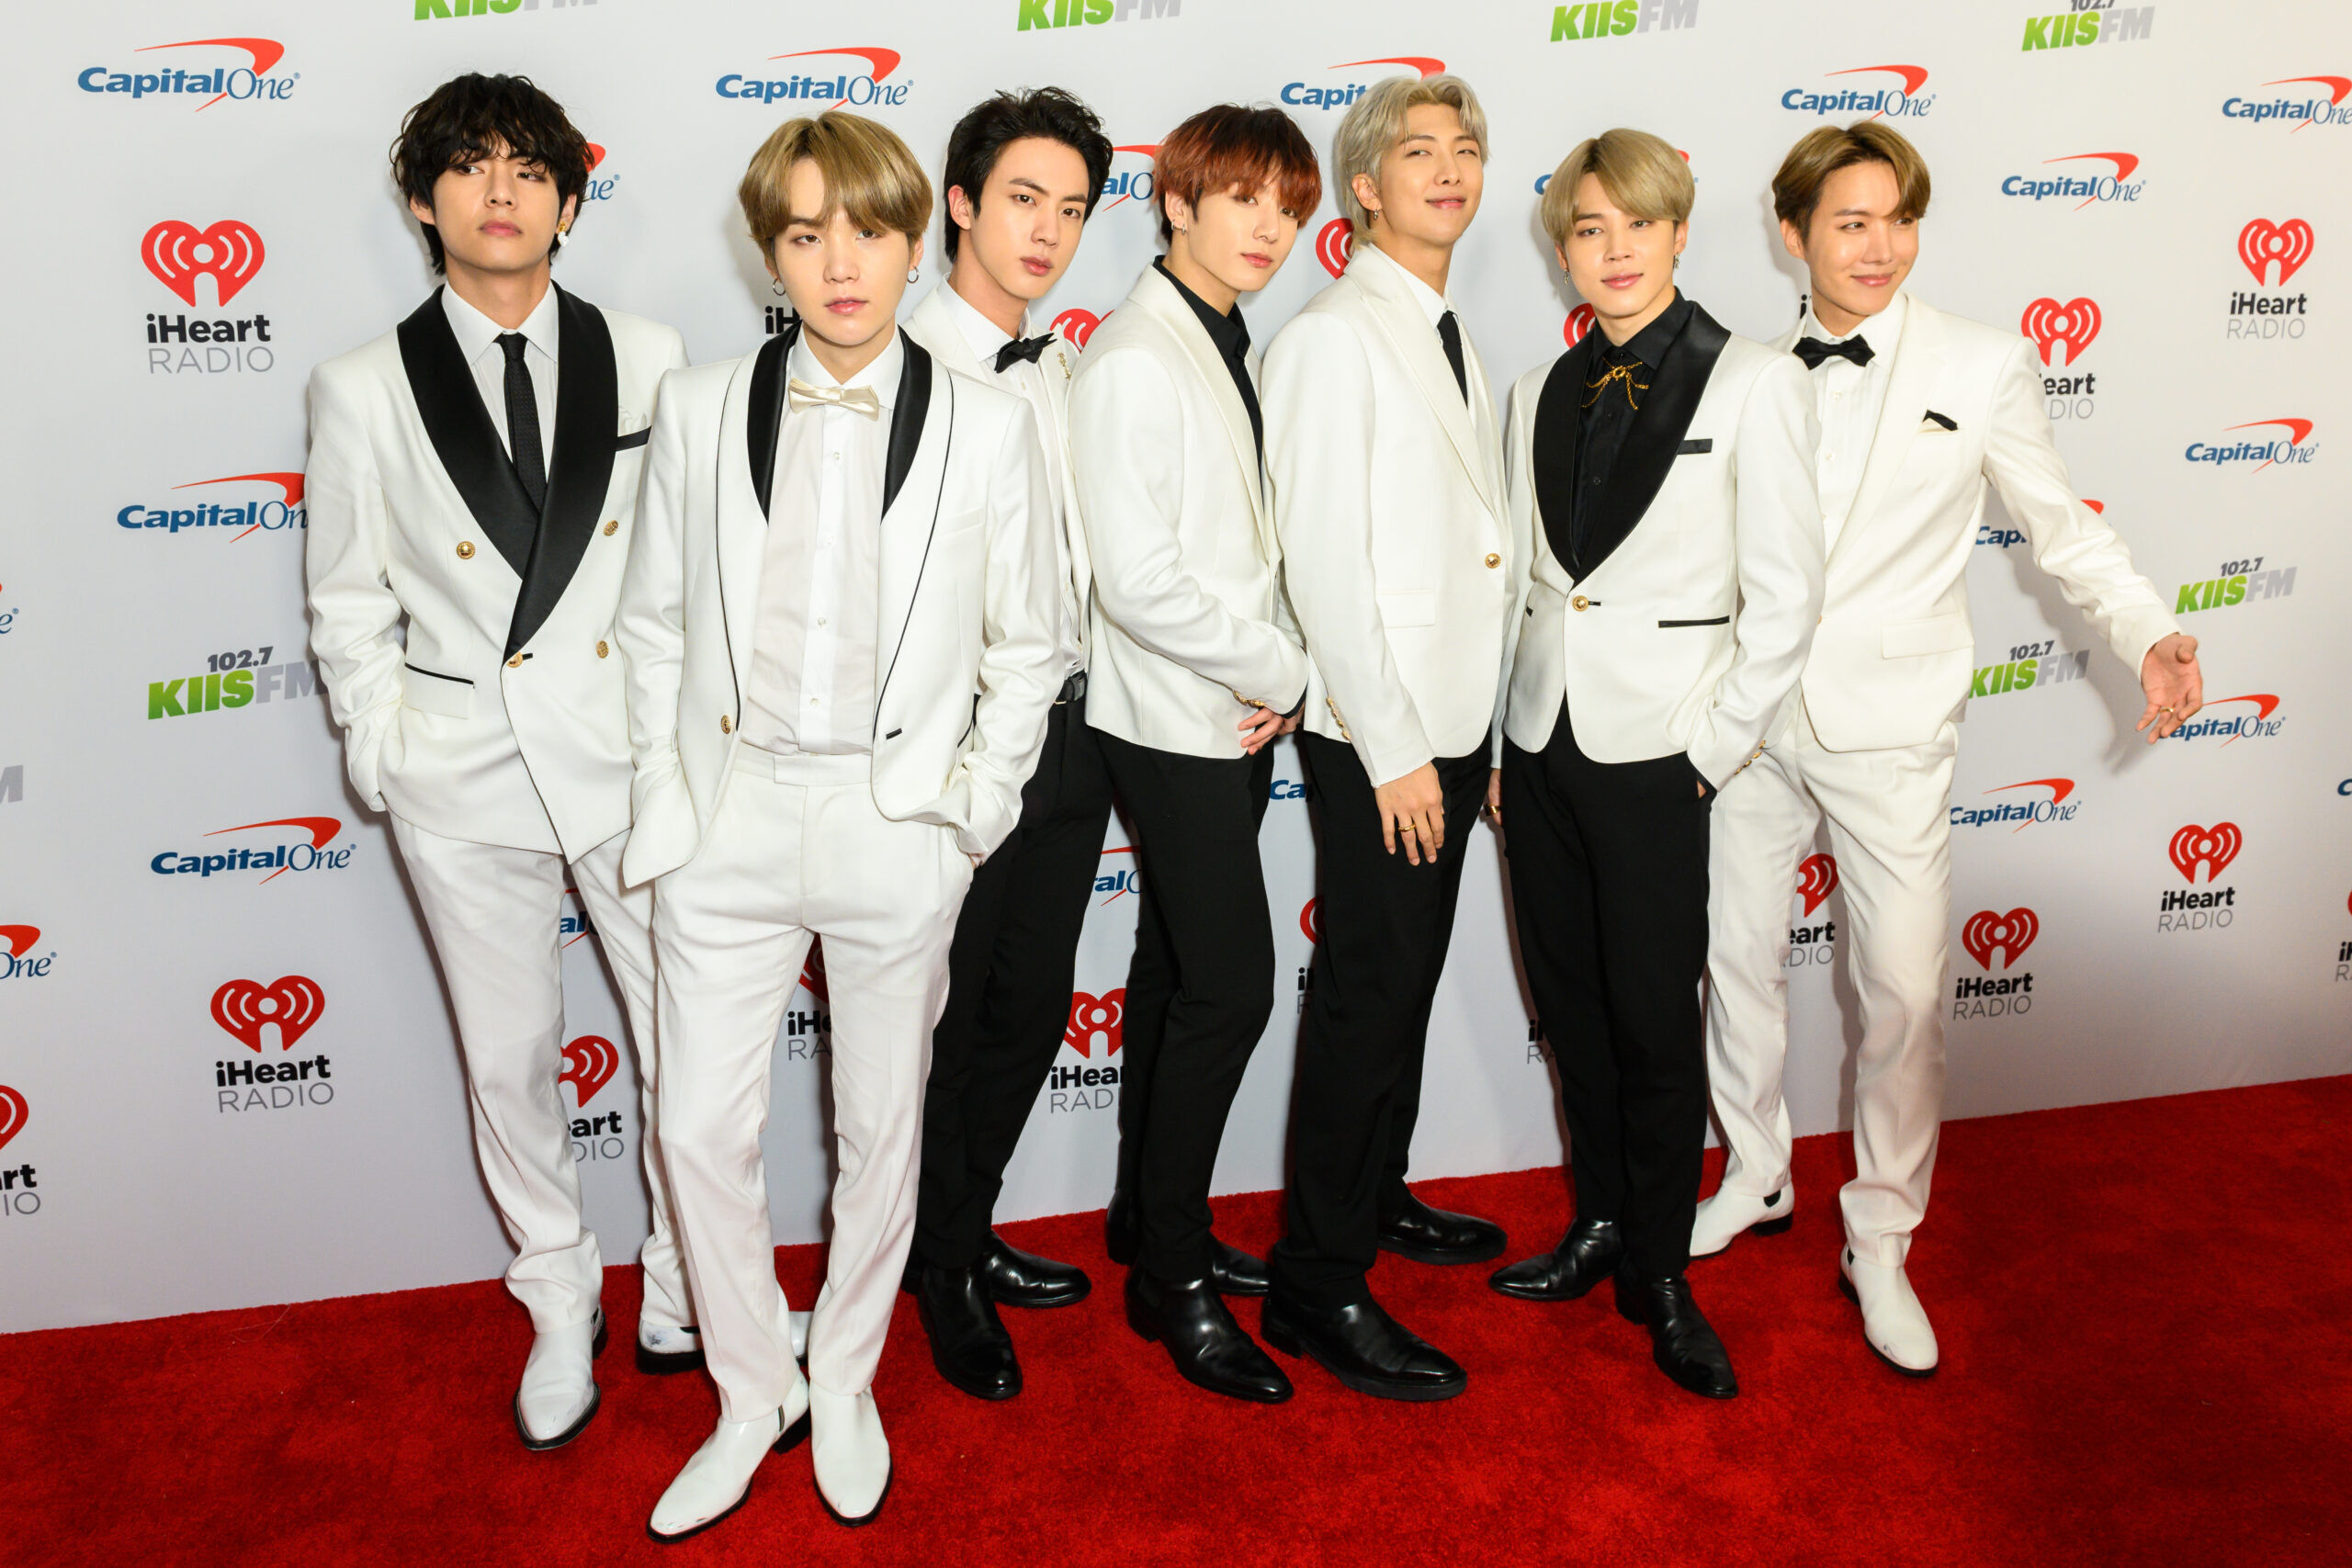 South Korean boy band BTS arrives for the KIIS FM's iHeartRadio Jingle Ball at the Forum Los Angeles in Inglewood, California on December 6, 2019